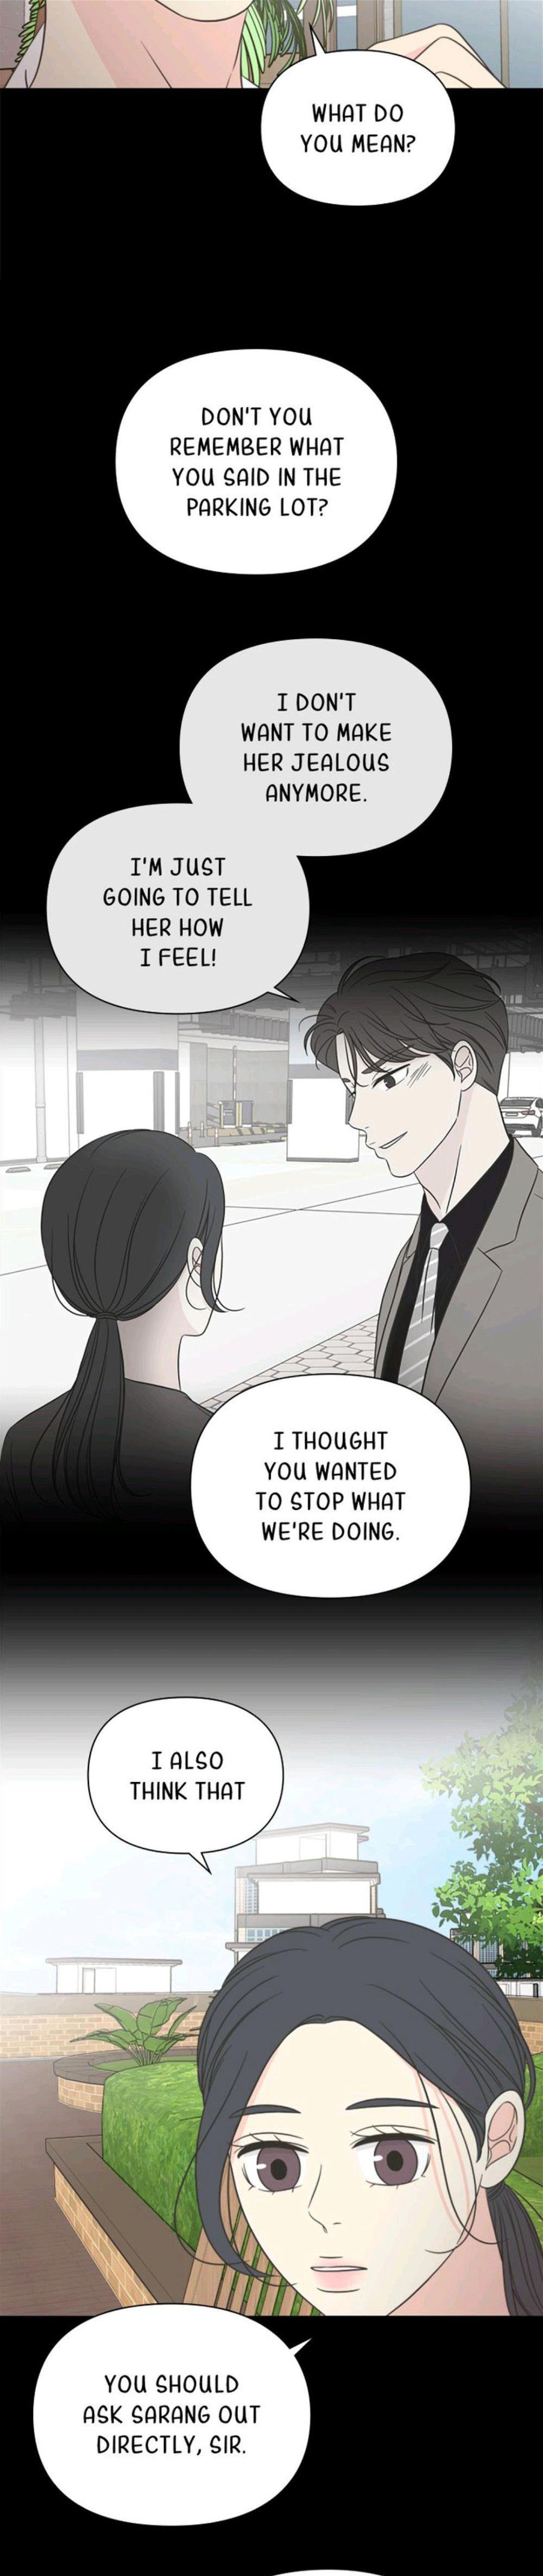 Check In to My Heart chapter 23 - Page 13